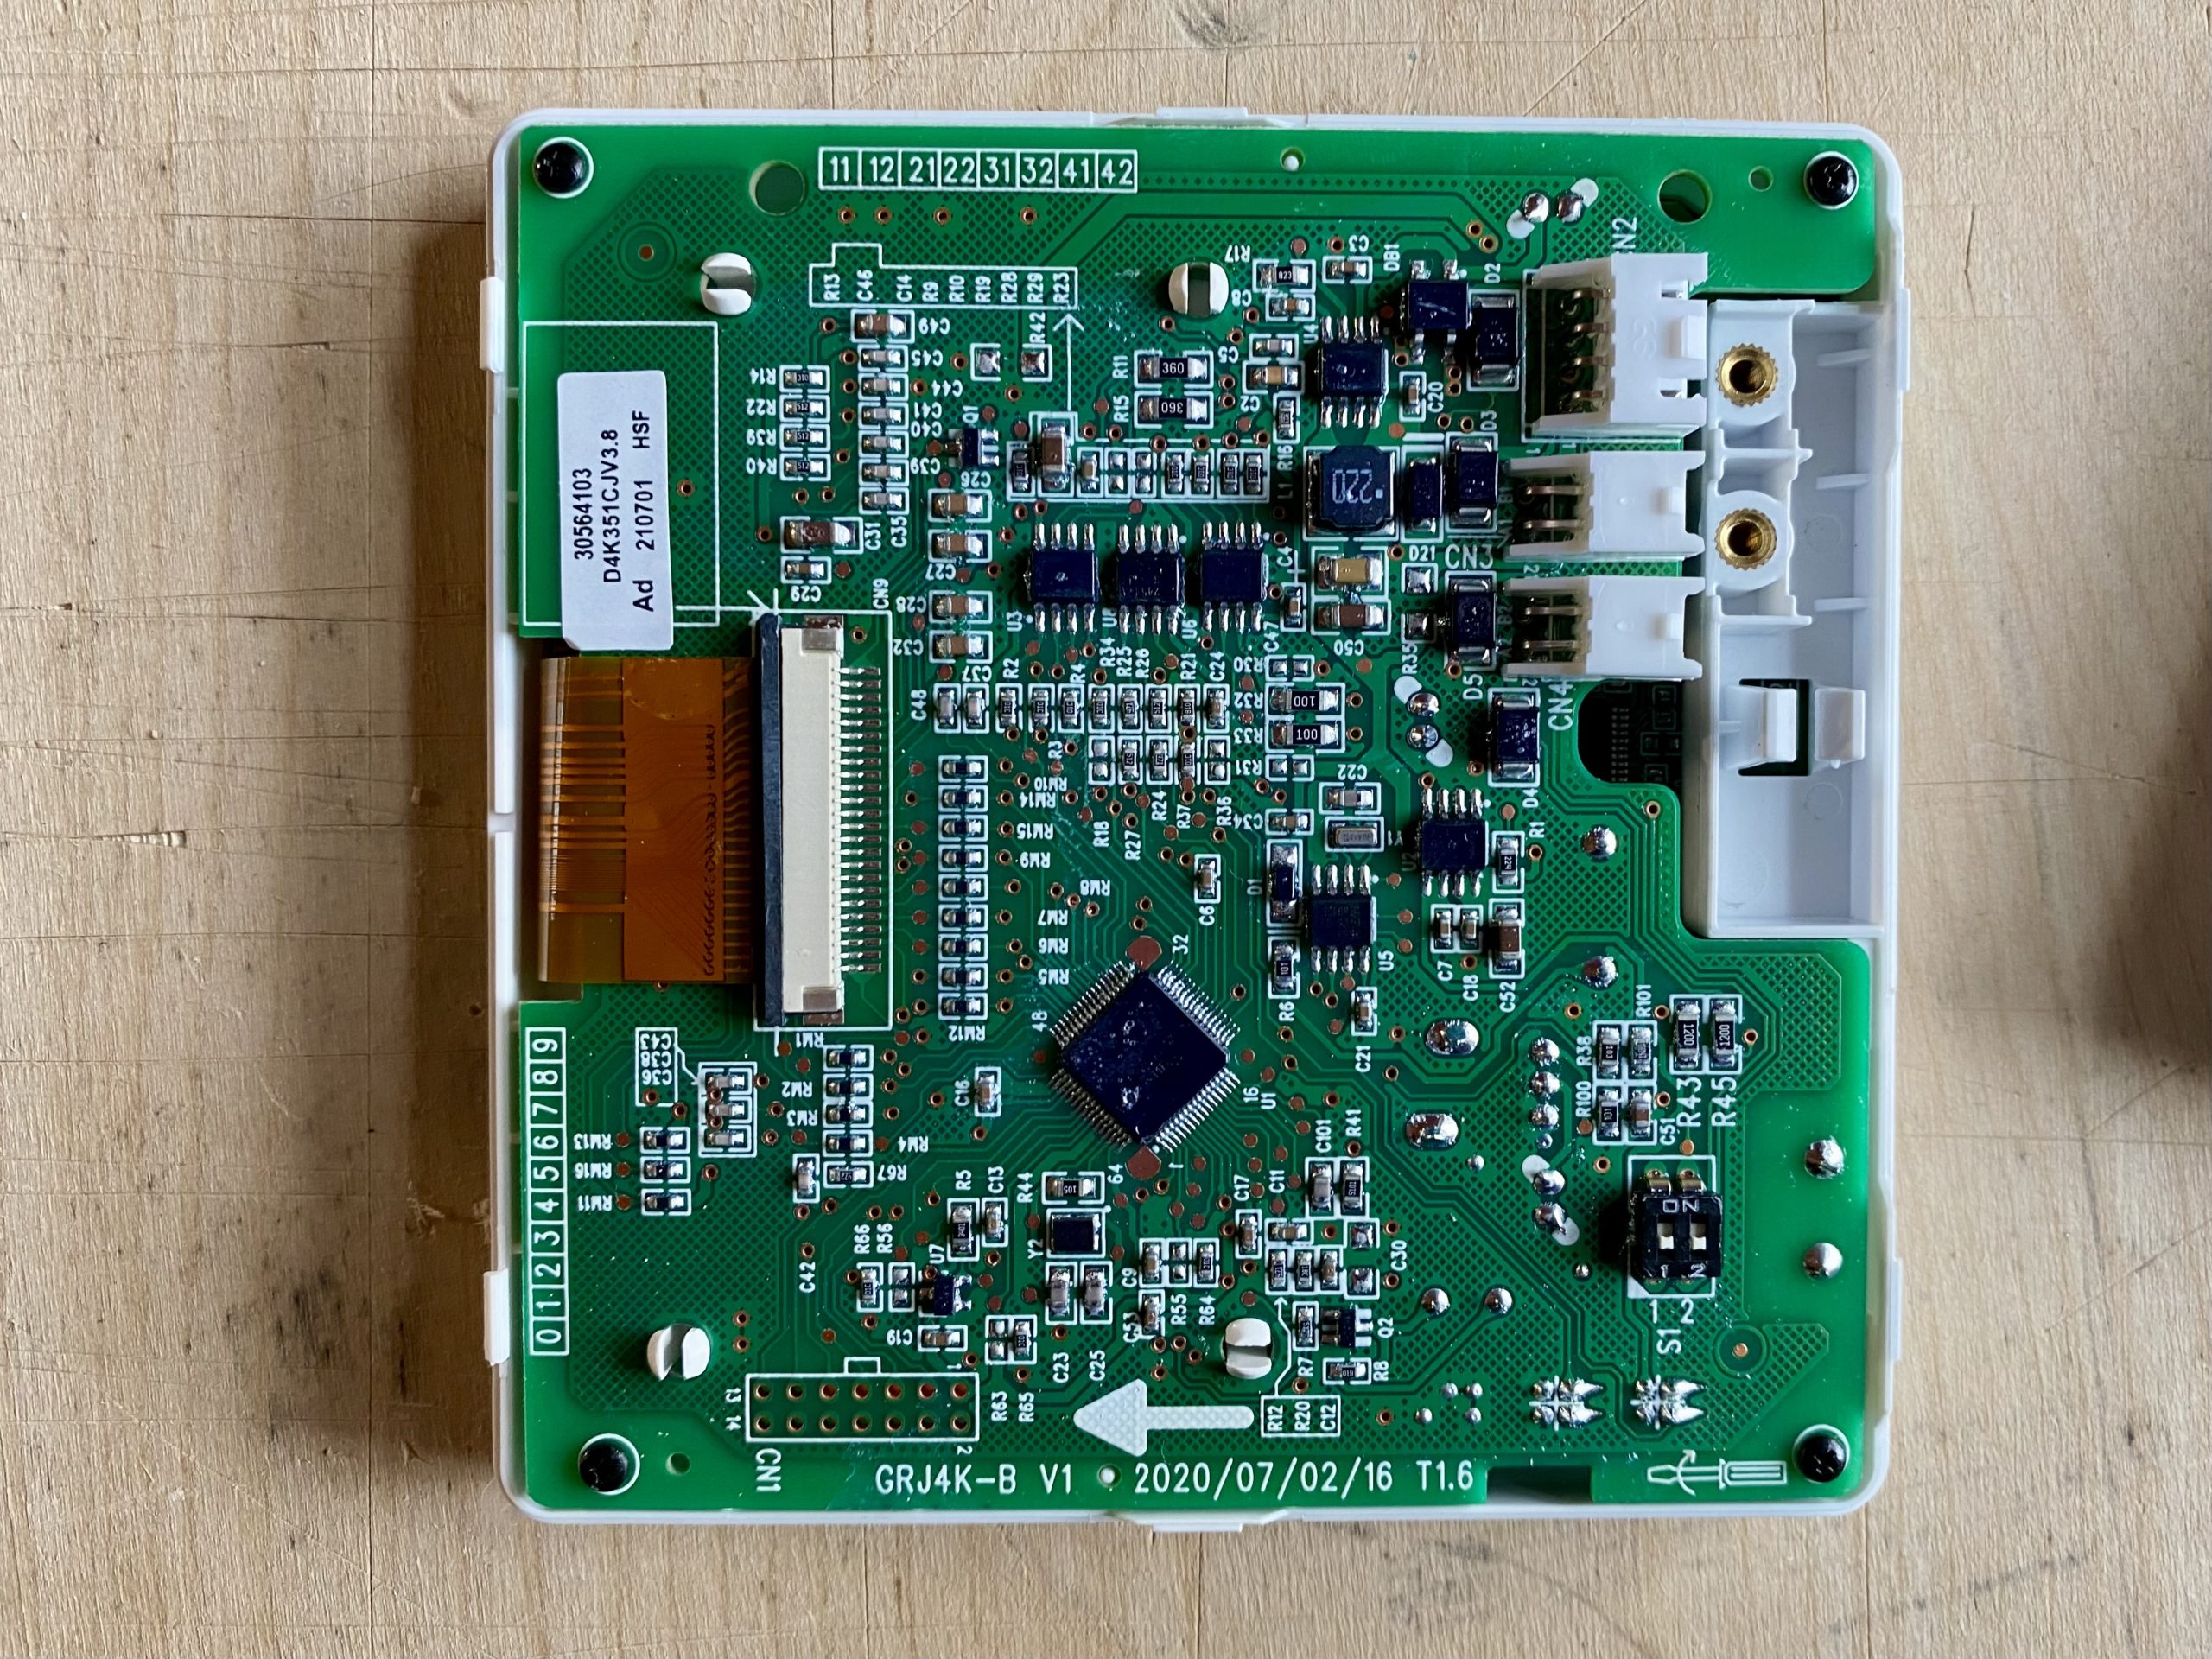 The PCB of the Gree Gree XK76 wired controller thermostat